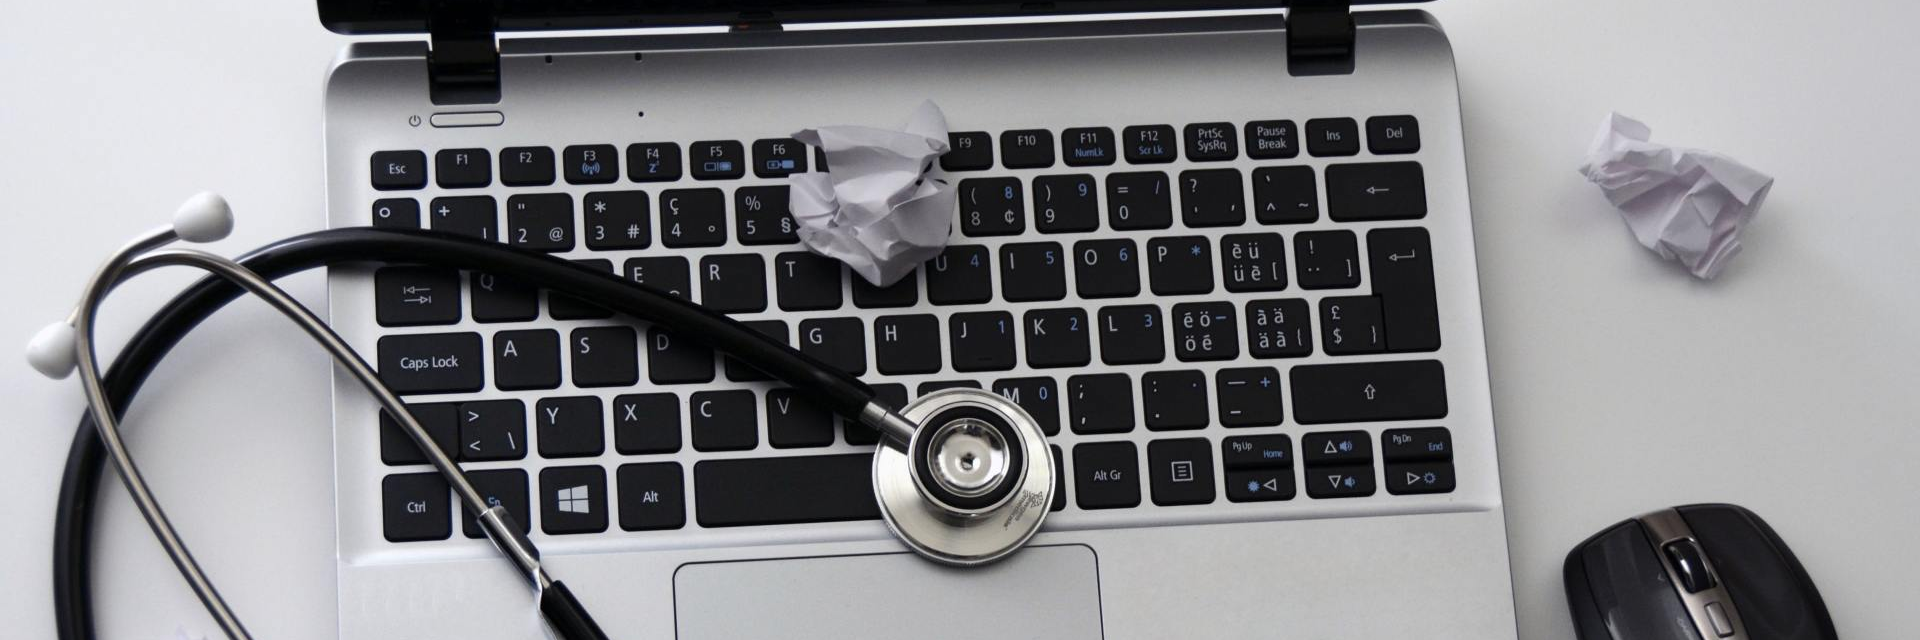 Laptop with stethoscope and crumpled paper on it.